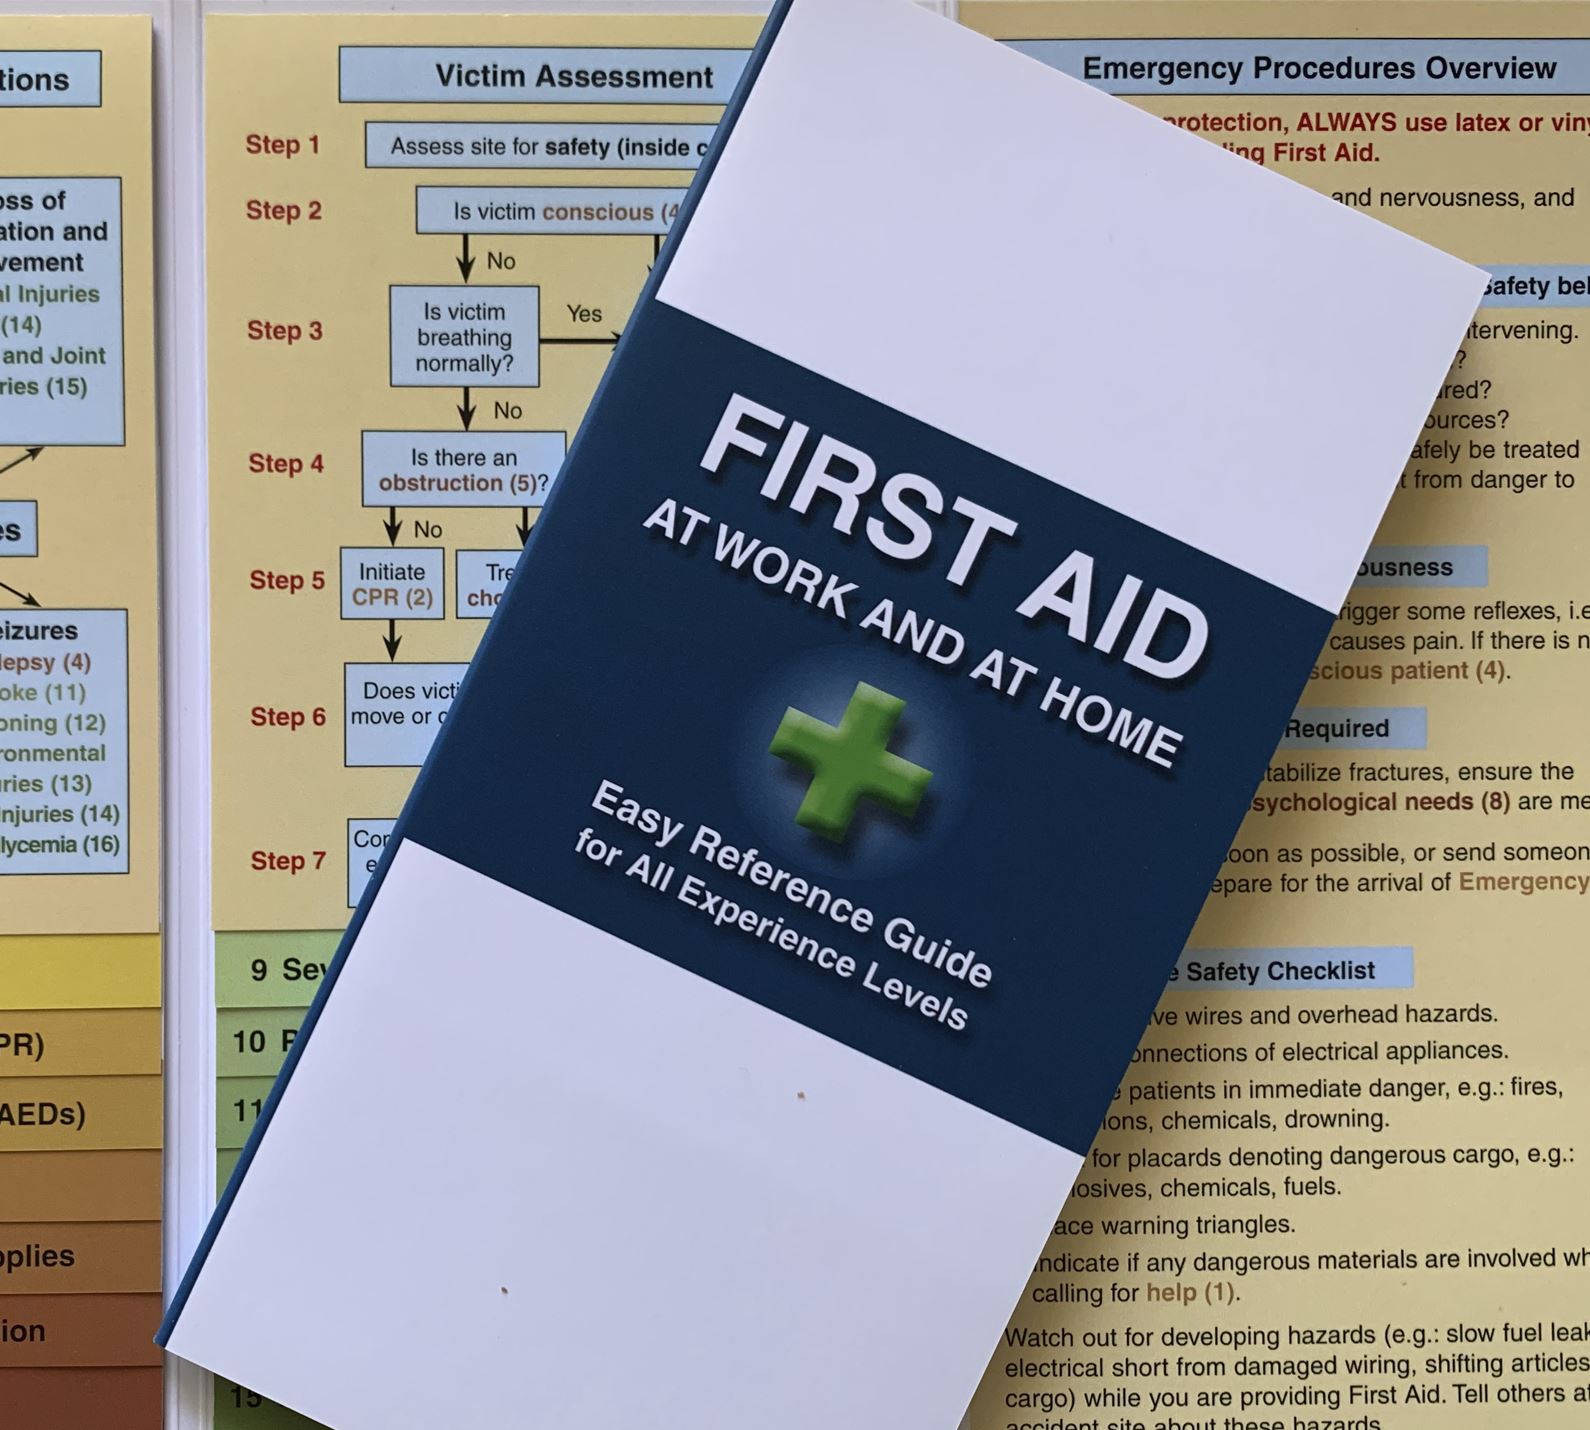 First aid brochure for work and home